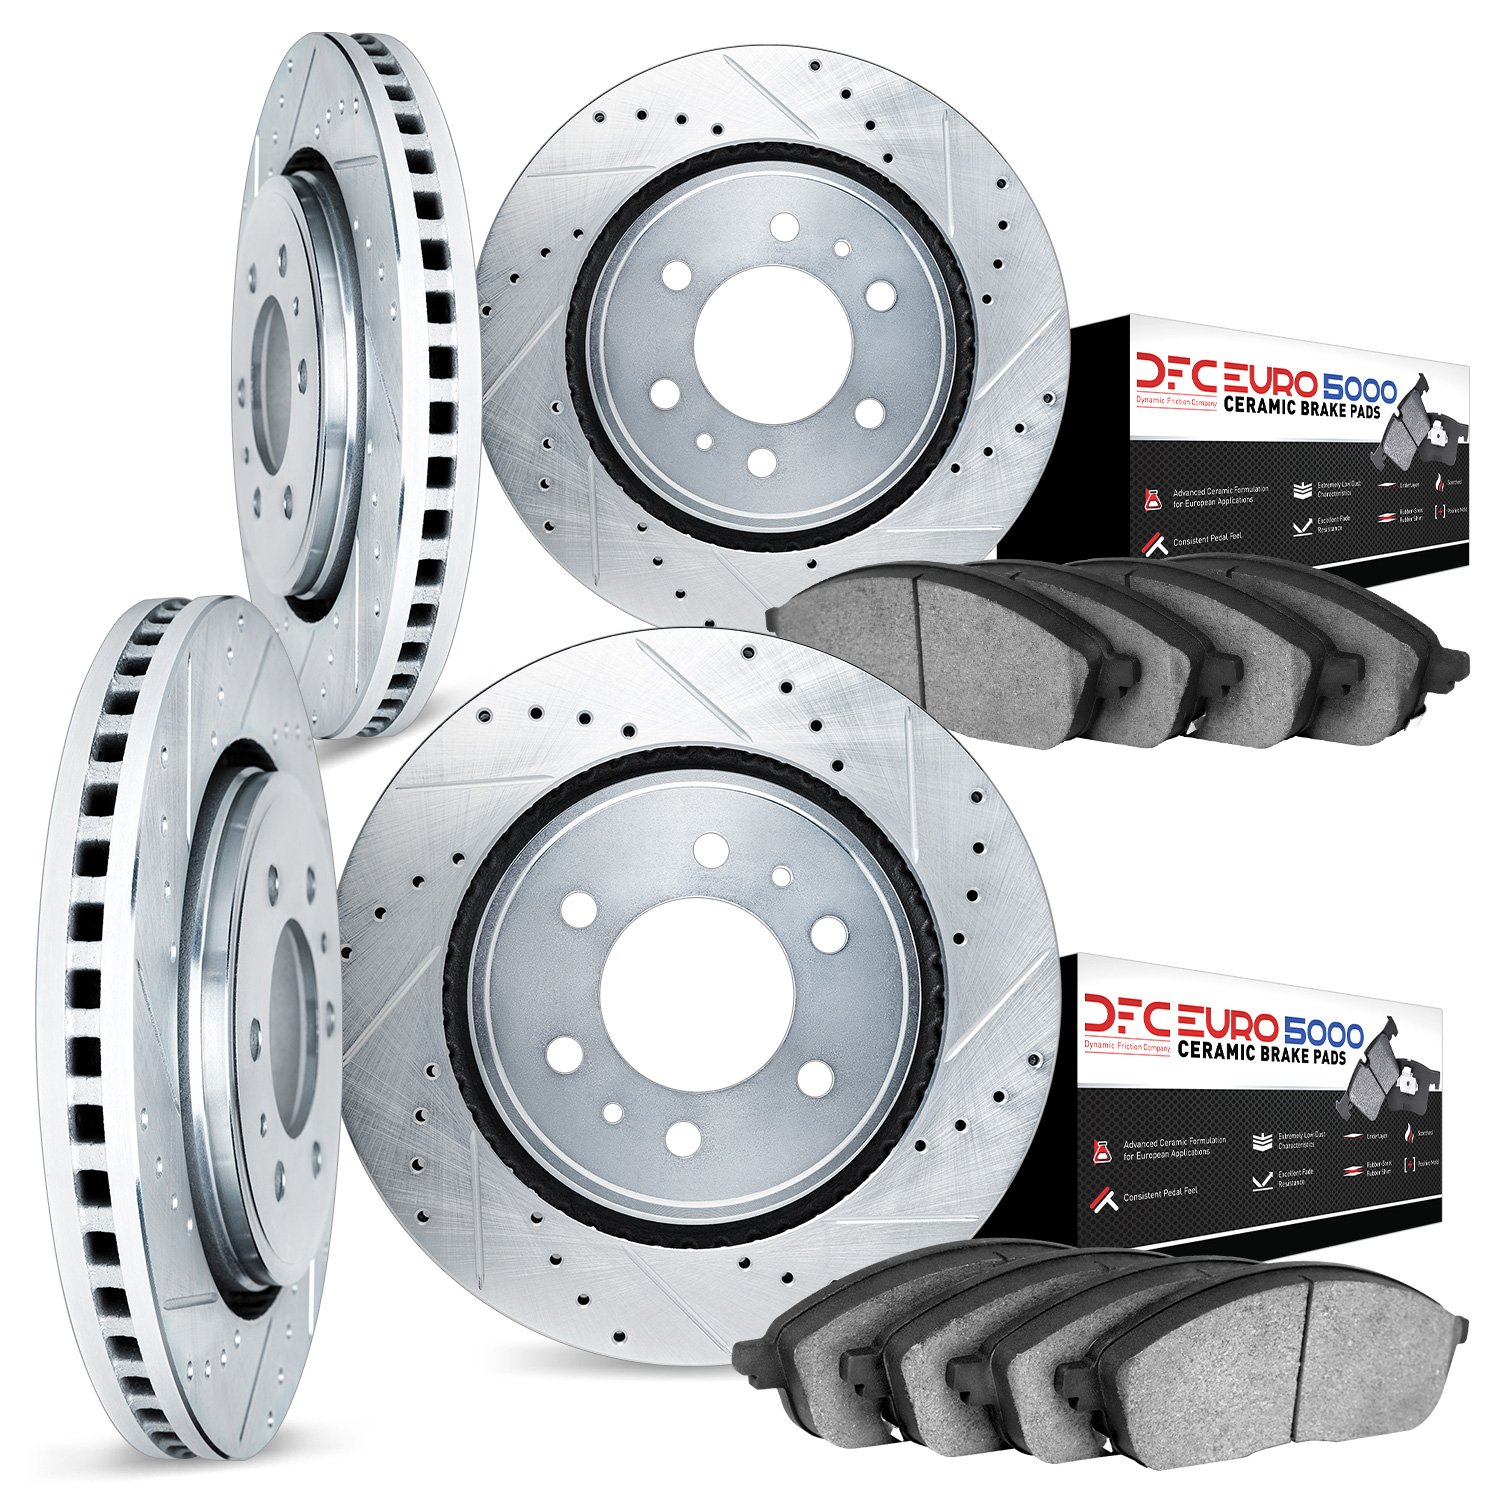 7604-46003 Drilled/Slotted Brake Rotors w/5000 Euro Ceramic Brake Pads Kit [Silver], 2004-2009 GM, Position: Front and Rear